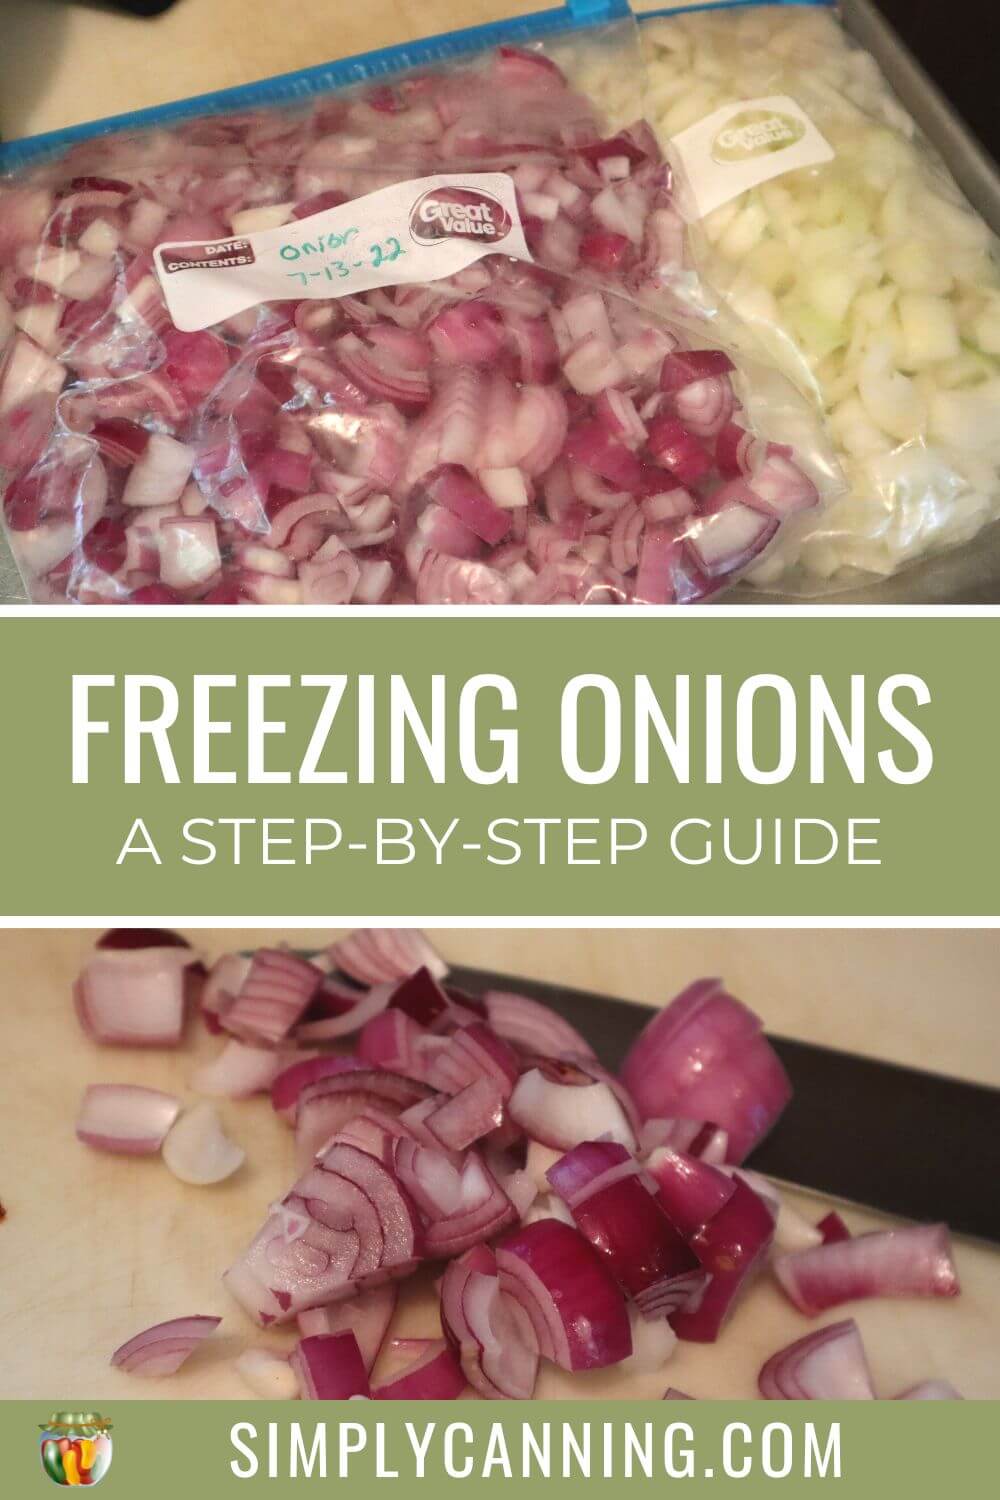 Freezing Onions: A Step-by-Step Guide